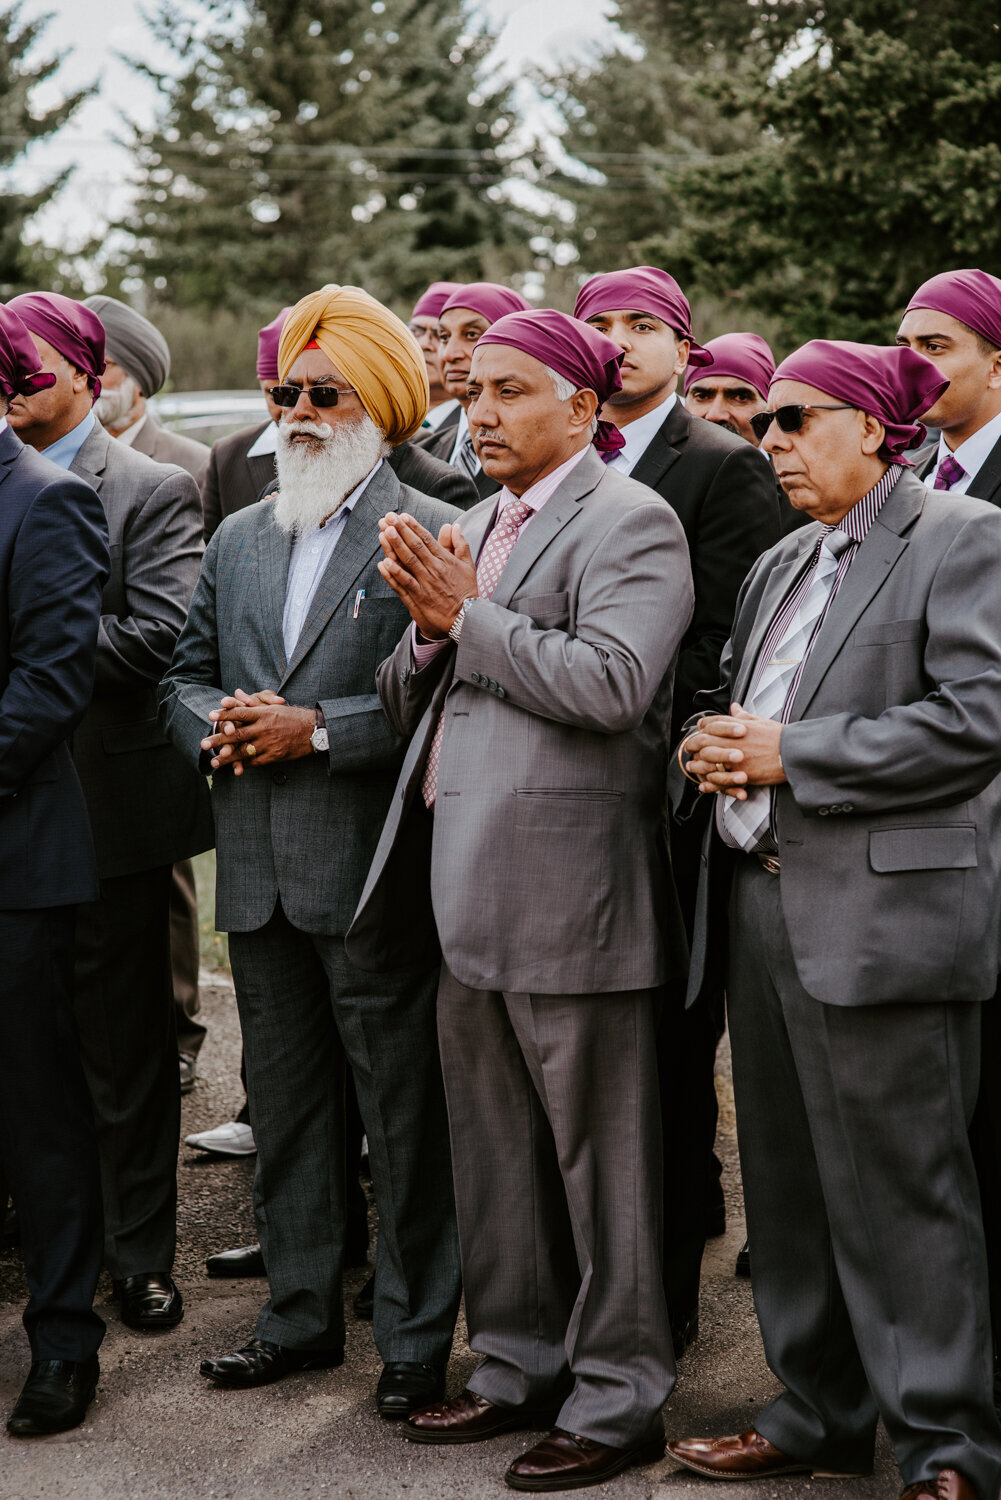 Vancouver Sikh Indian wedding photography